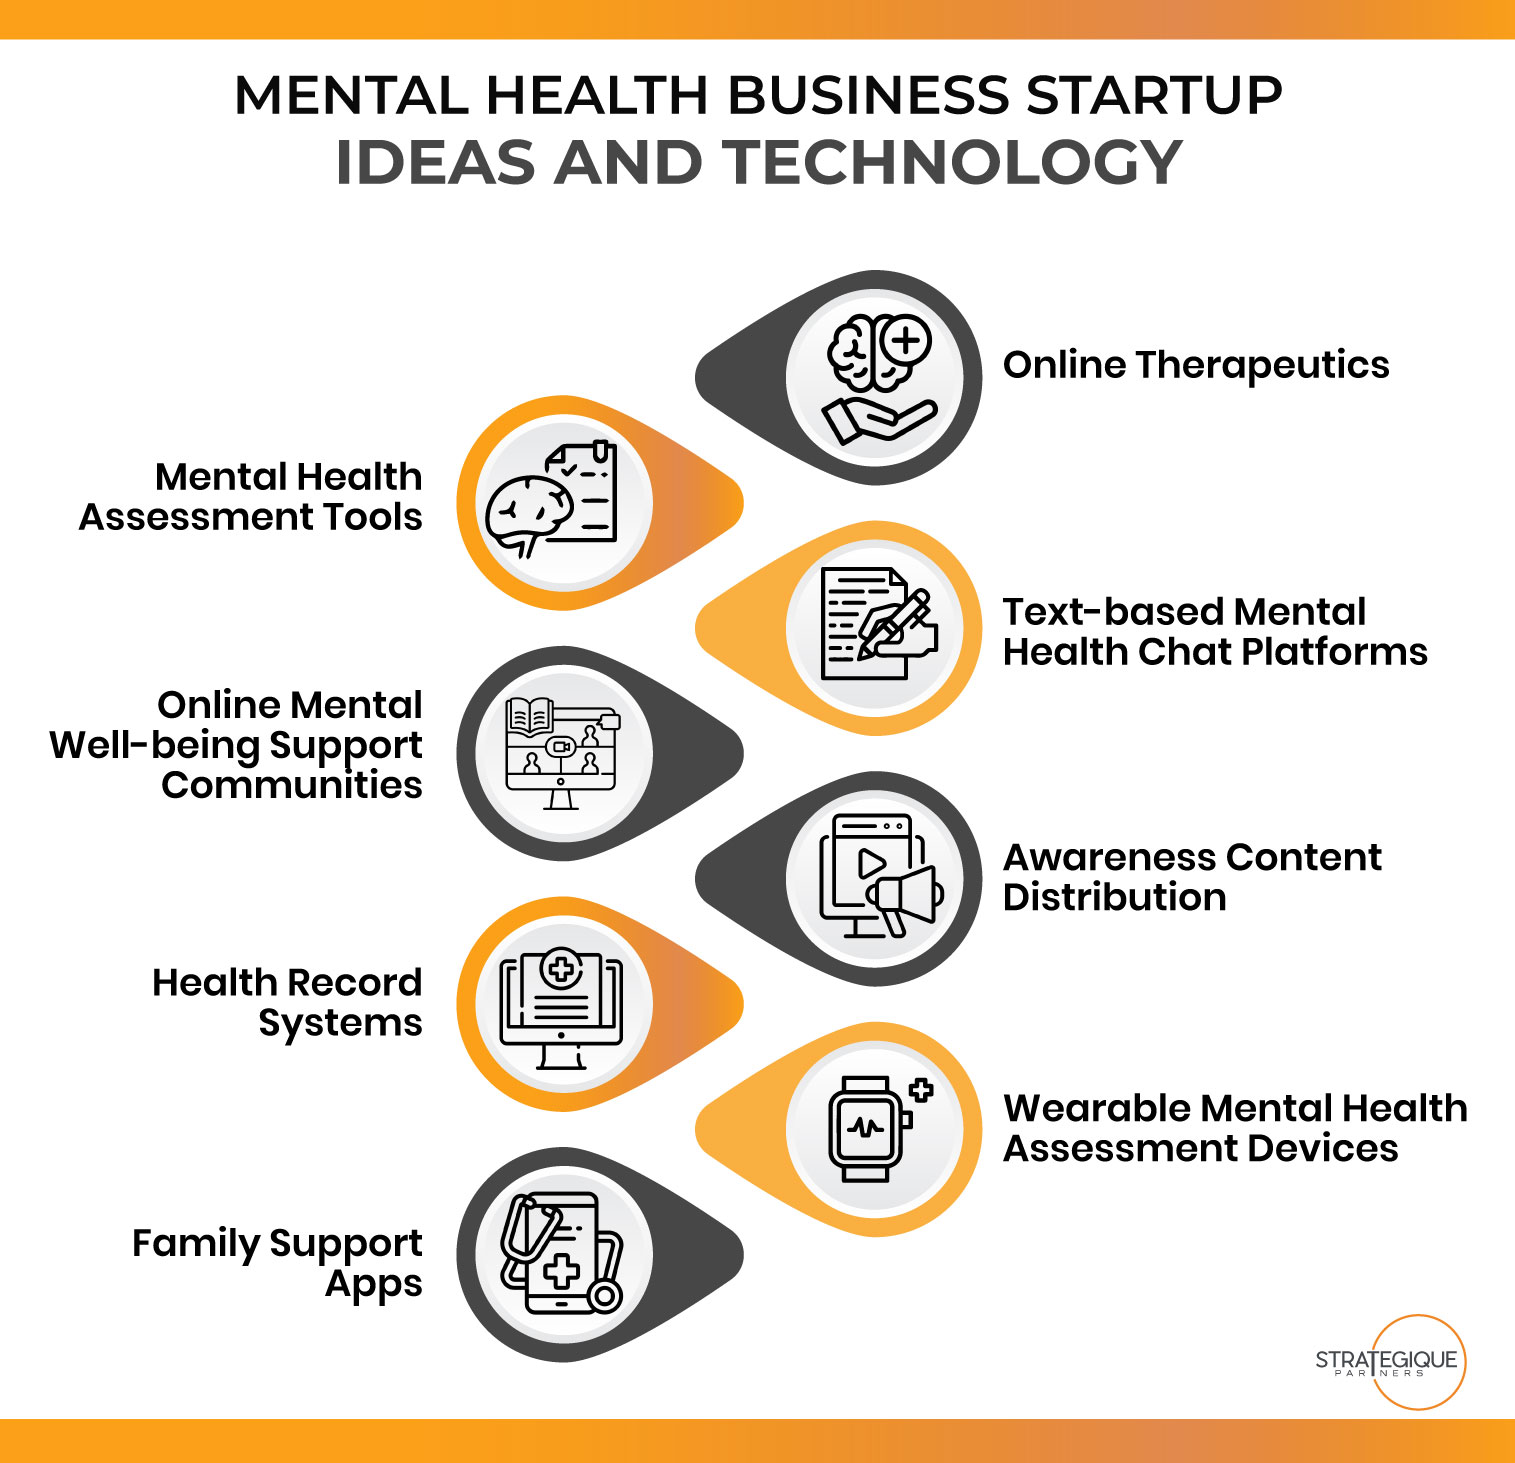 How to Start a Mental Health Business